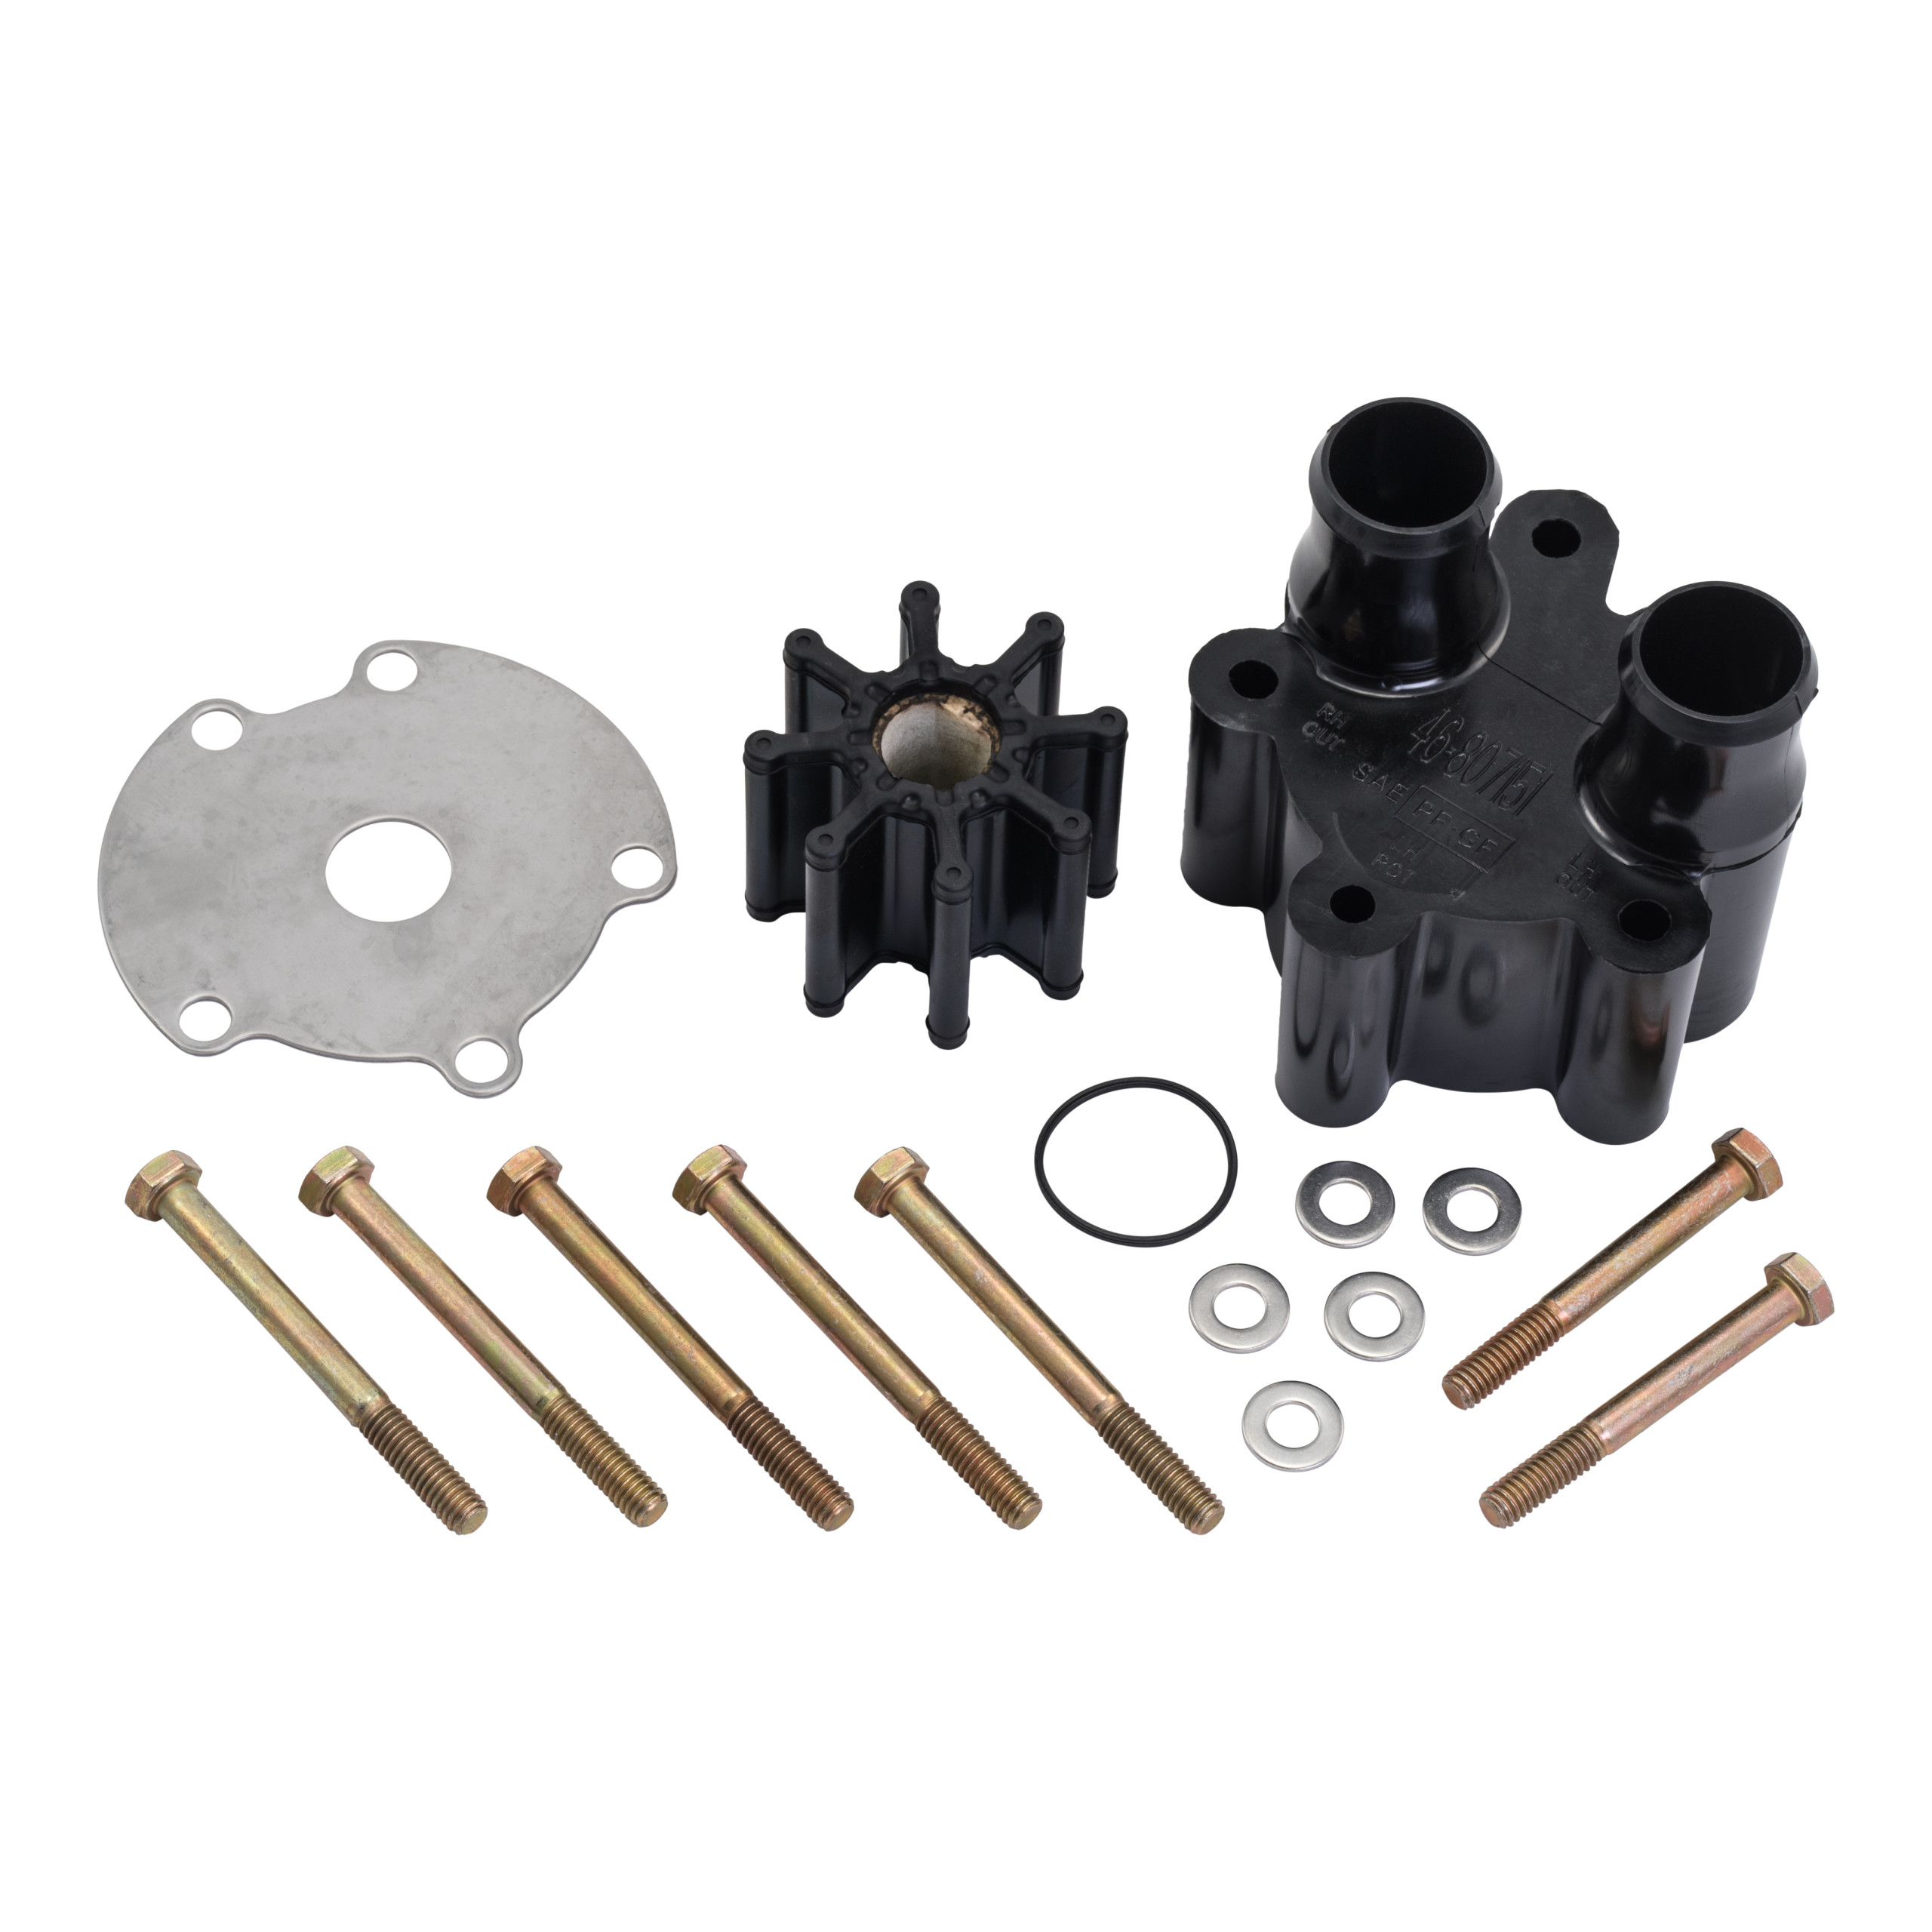 Water Pump Housing and Impeller Repair Kit Replacement for Mercruiser Alpha 46-807151A7 807151A14 Bravo Engines Water Pump Replace 46-807151A14 807151A7